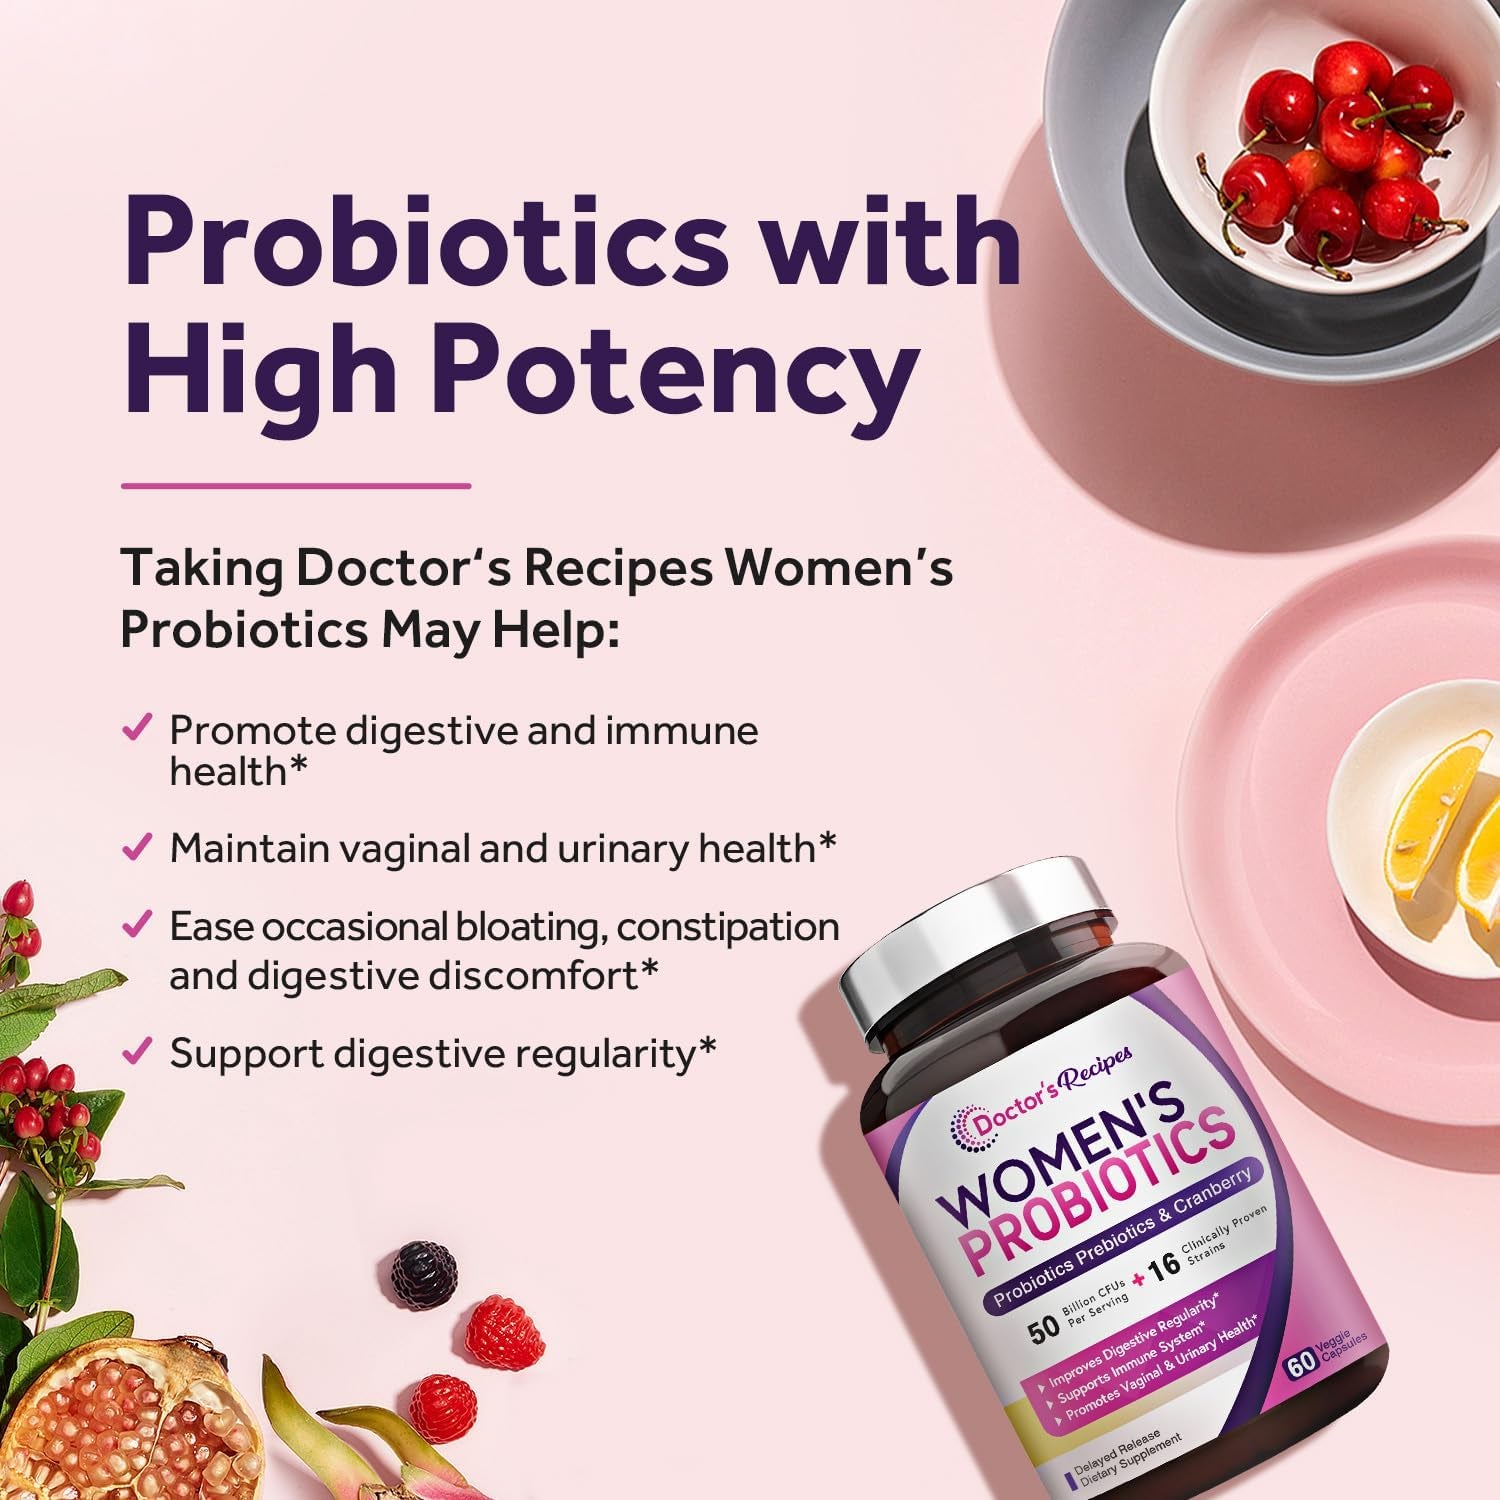 Women's Probiotic with Organic Cranberry - 60 Capsules, 50 Billion CFU, 16 Strains-Digestive Immune Vaginal & Urinary Health, Shelf Stable, Delayed Release, No Soy Gluten Dairy